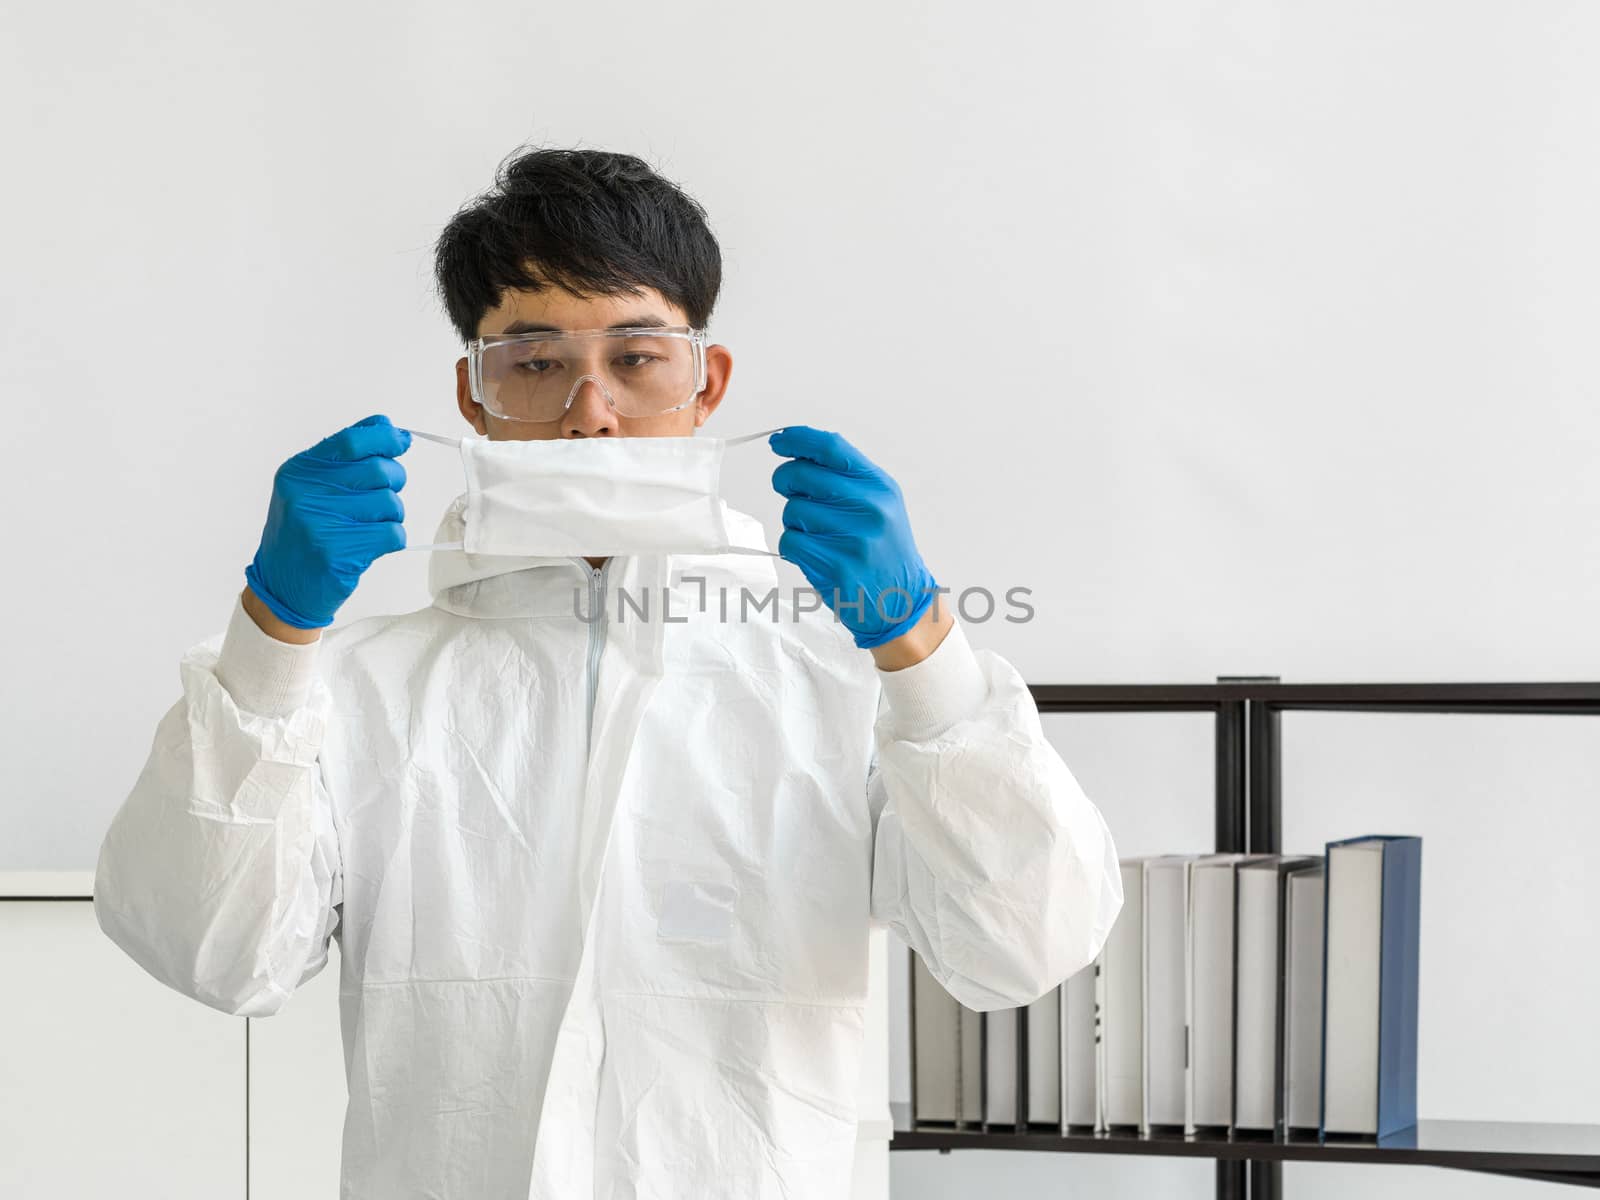 Asian scientists inspect the quality of a mask before beginning the experiment in a scientific laboratory.